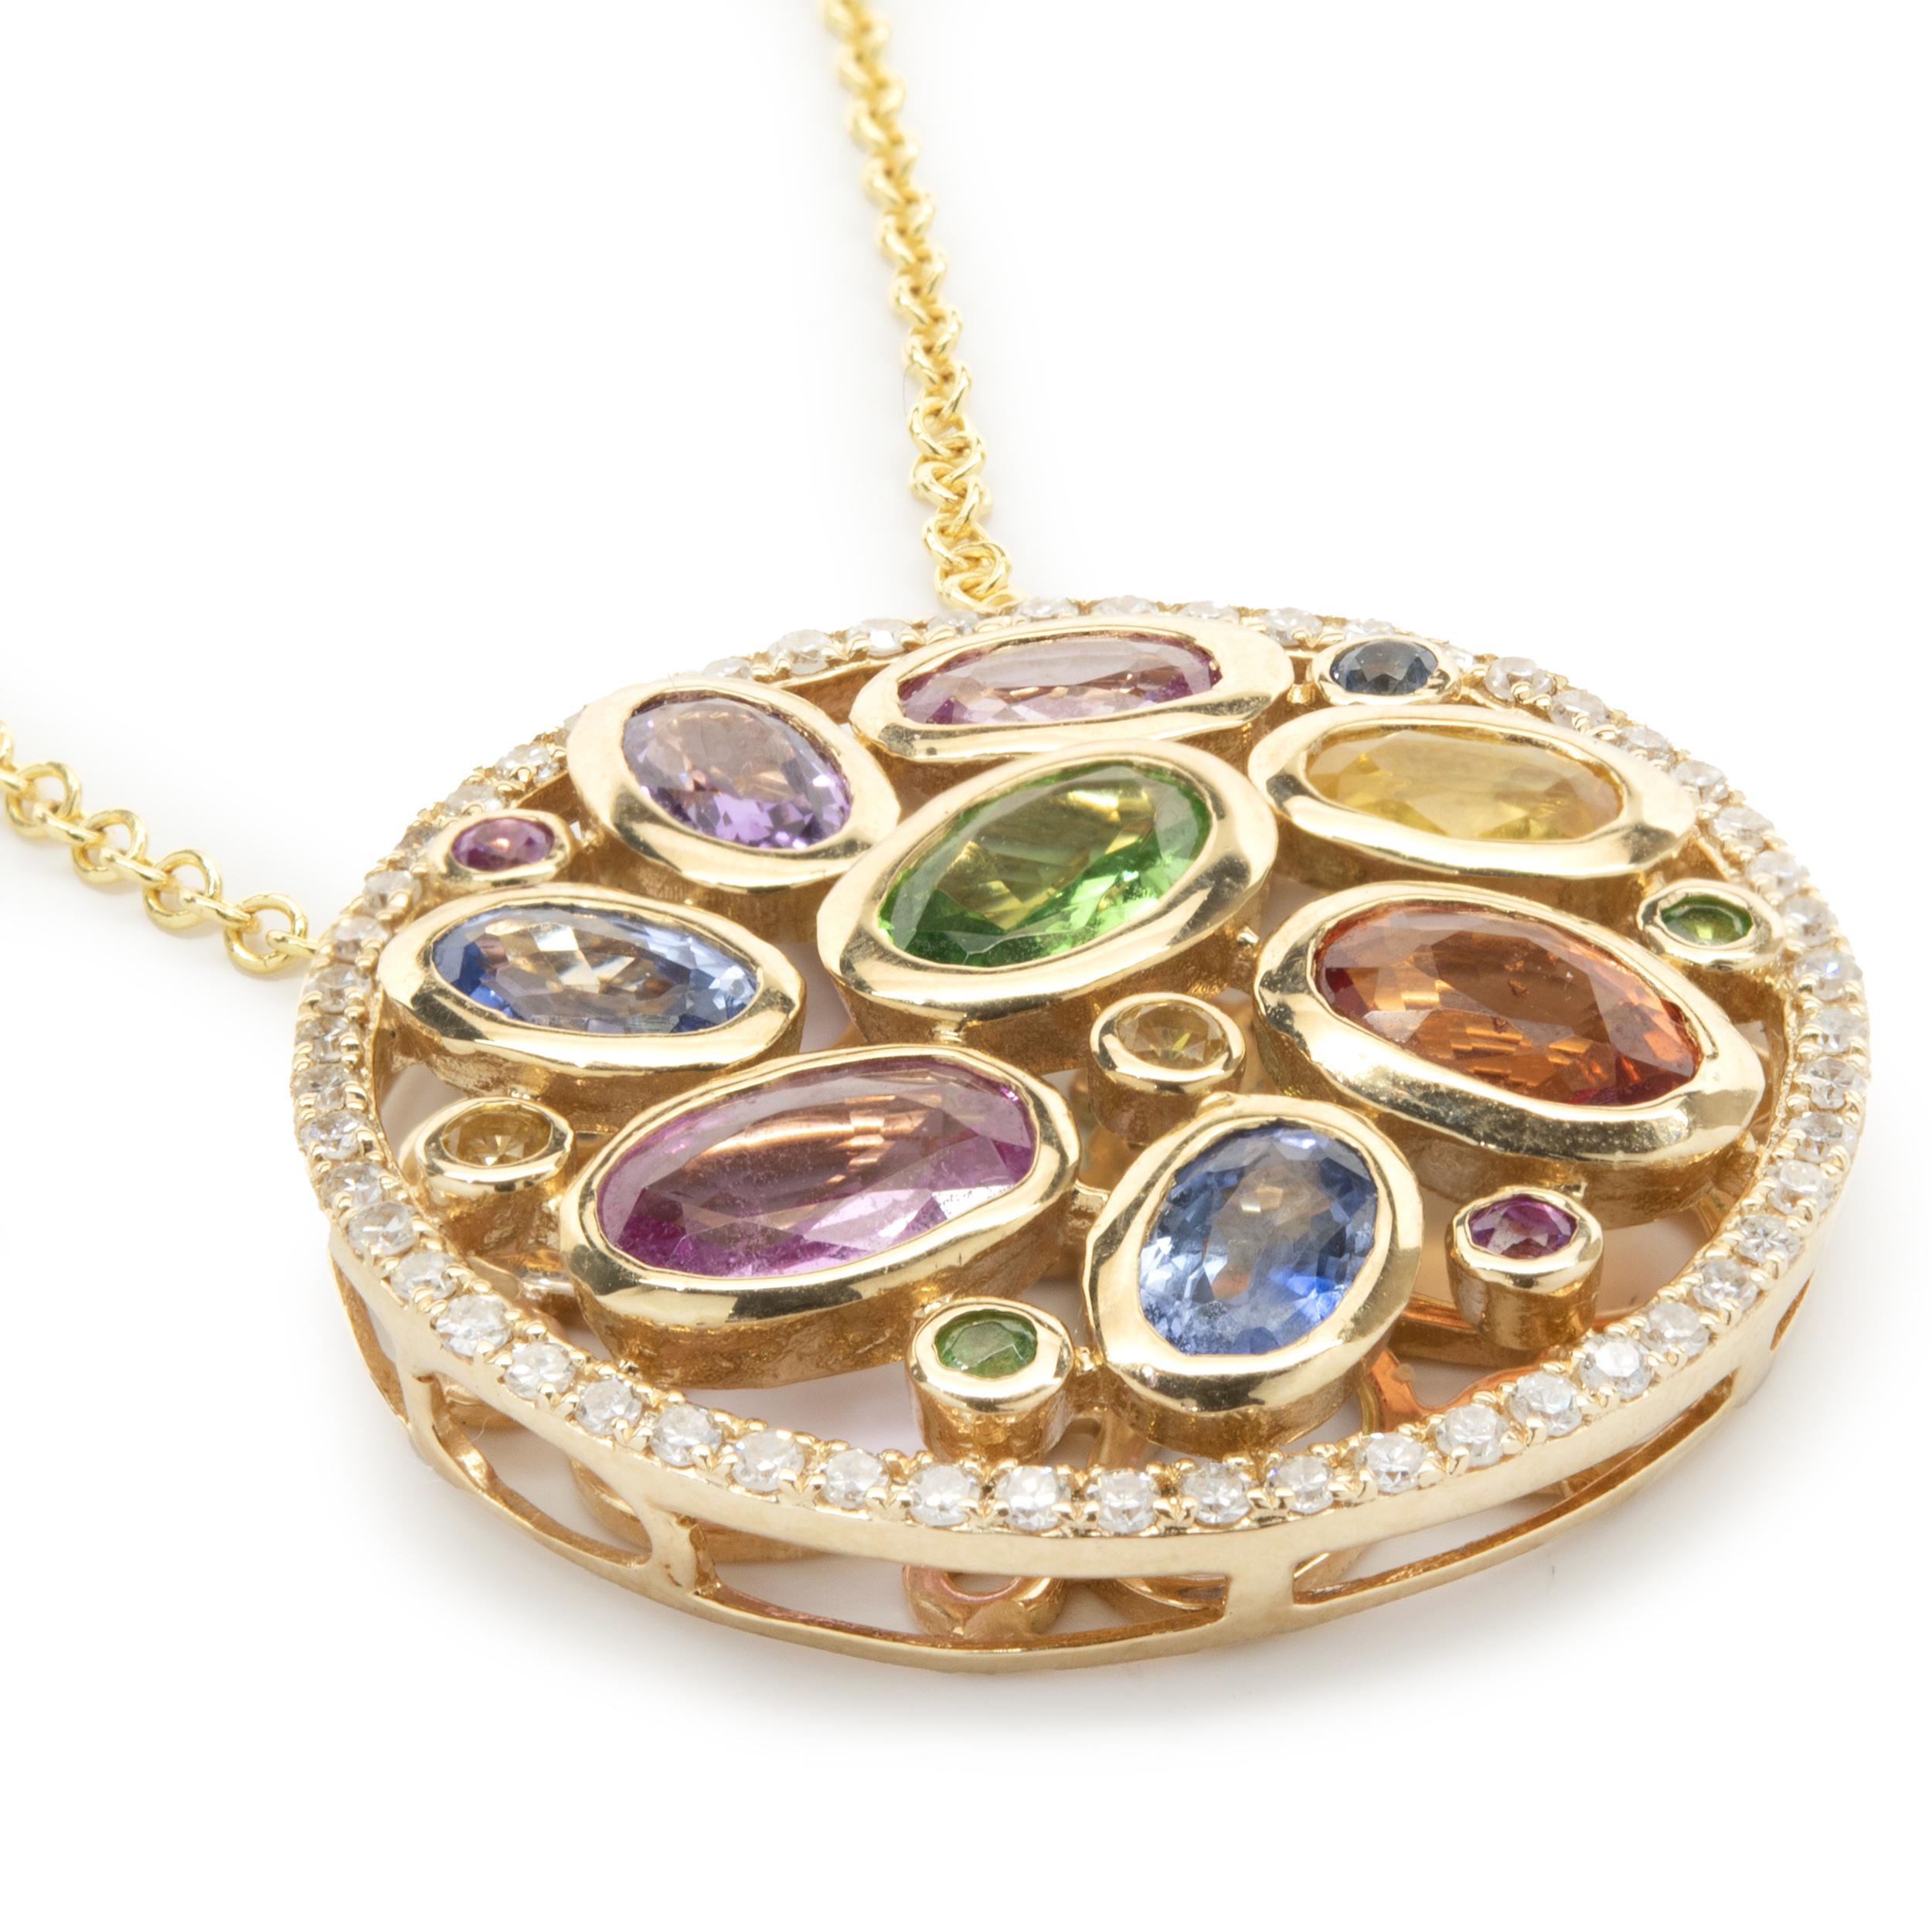 Designer: Effy
Material: 14K yellow gold
Diamond: round brilliant cut = .20cttw
Color: G
Clarity: SI1
Sapphire: oval cut = 3.42cttw
Weight: 6.09 grams
Dimensions: necklace measures 18-inches in length